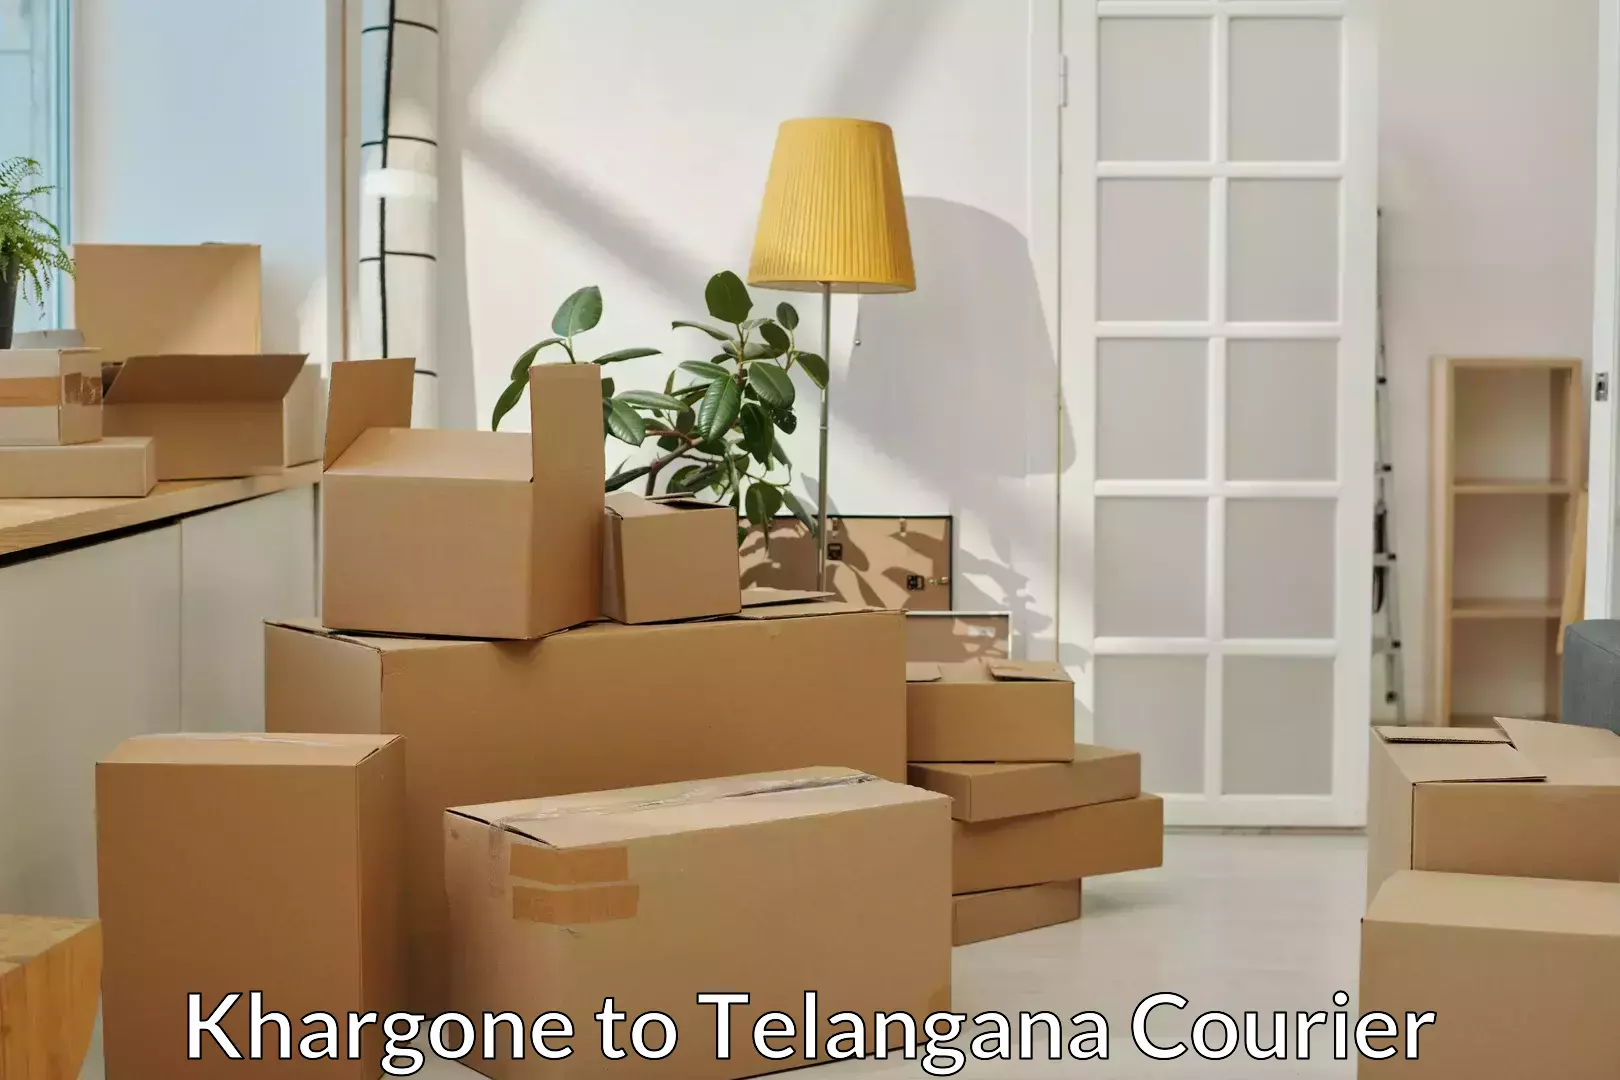 Trusted home movers Khargone to Nalgonda